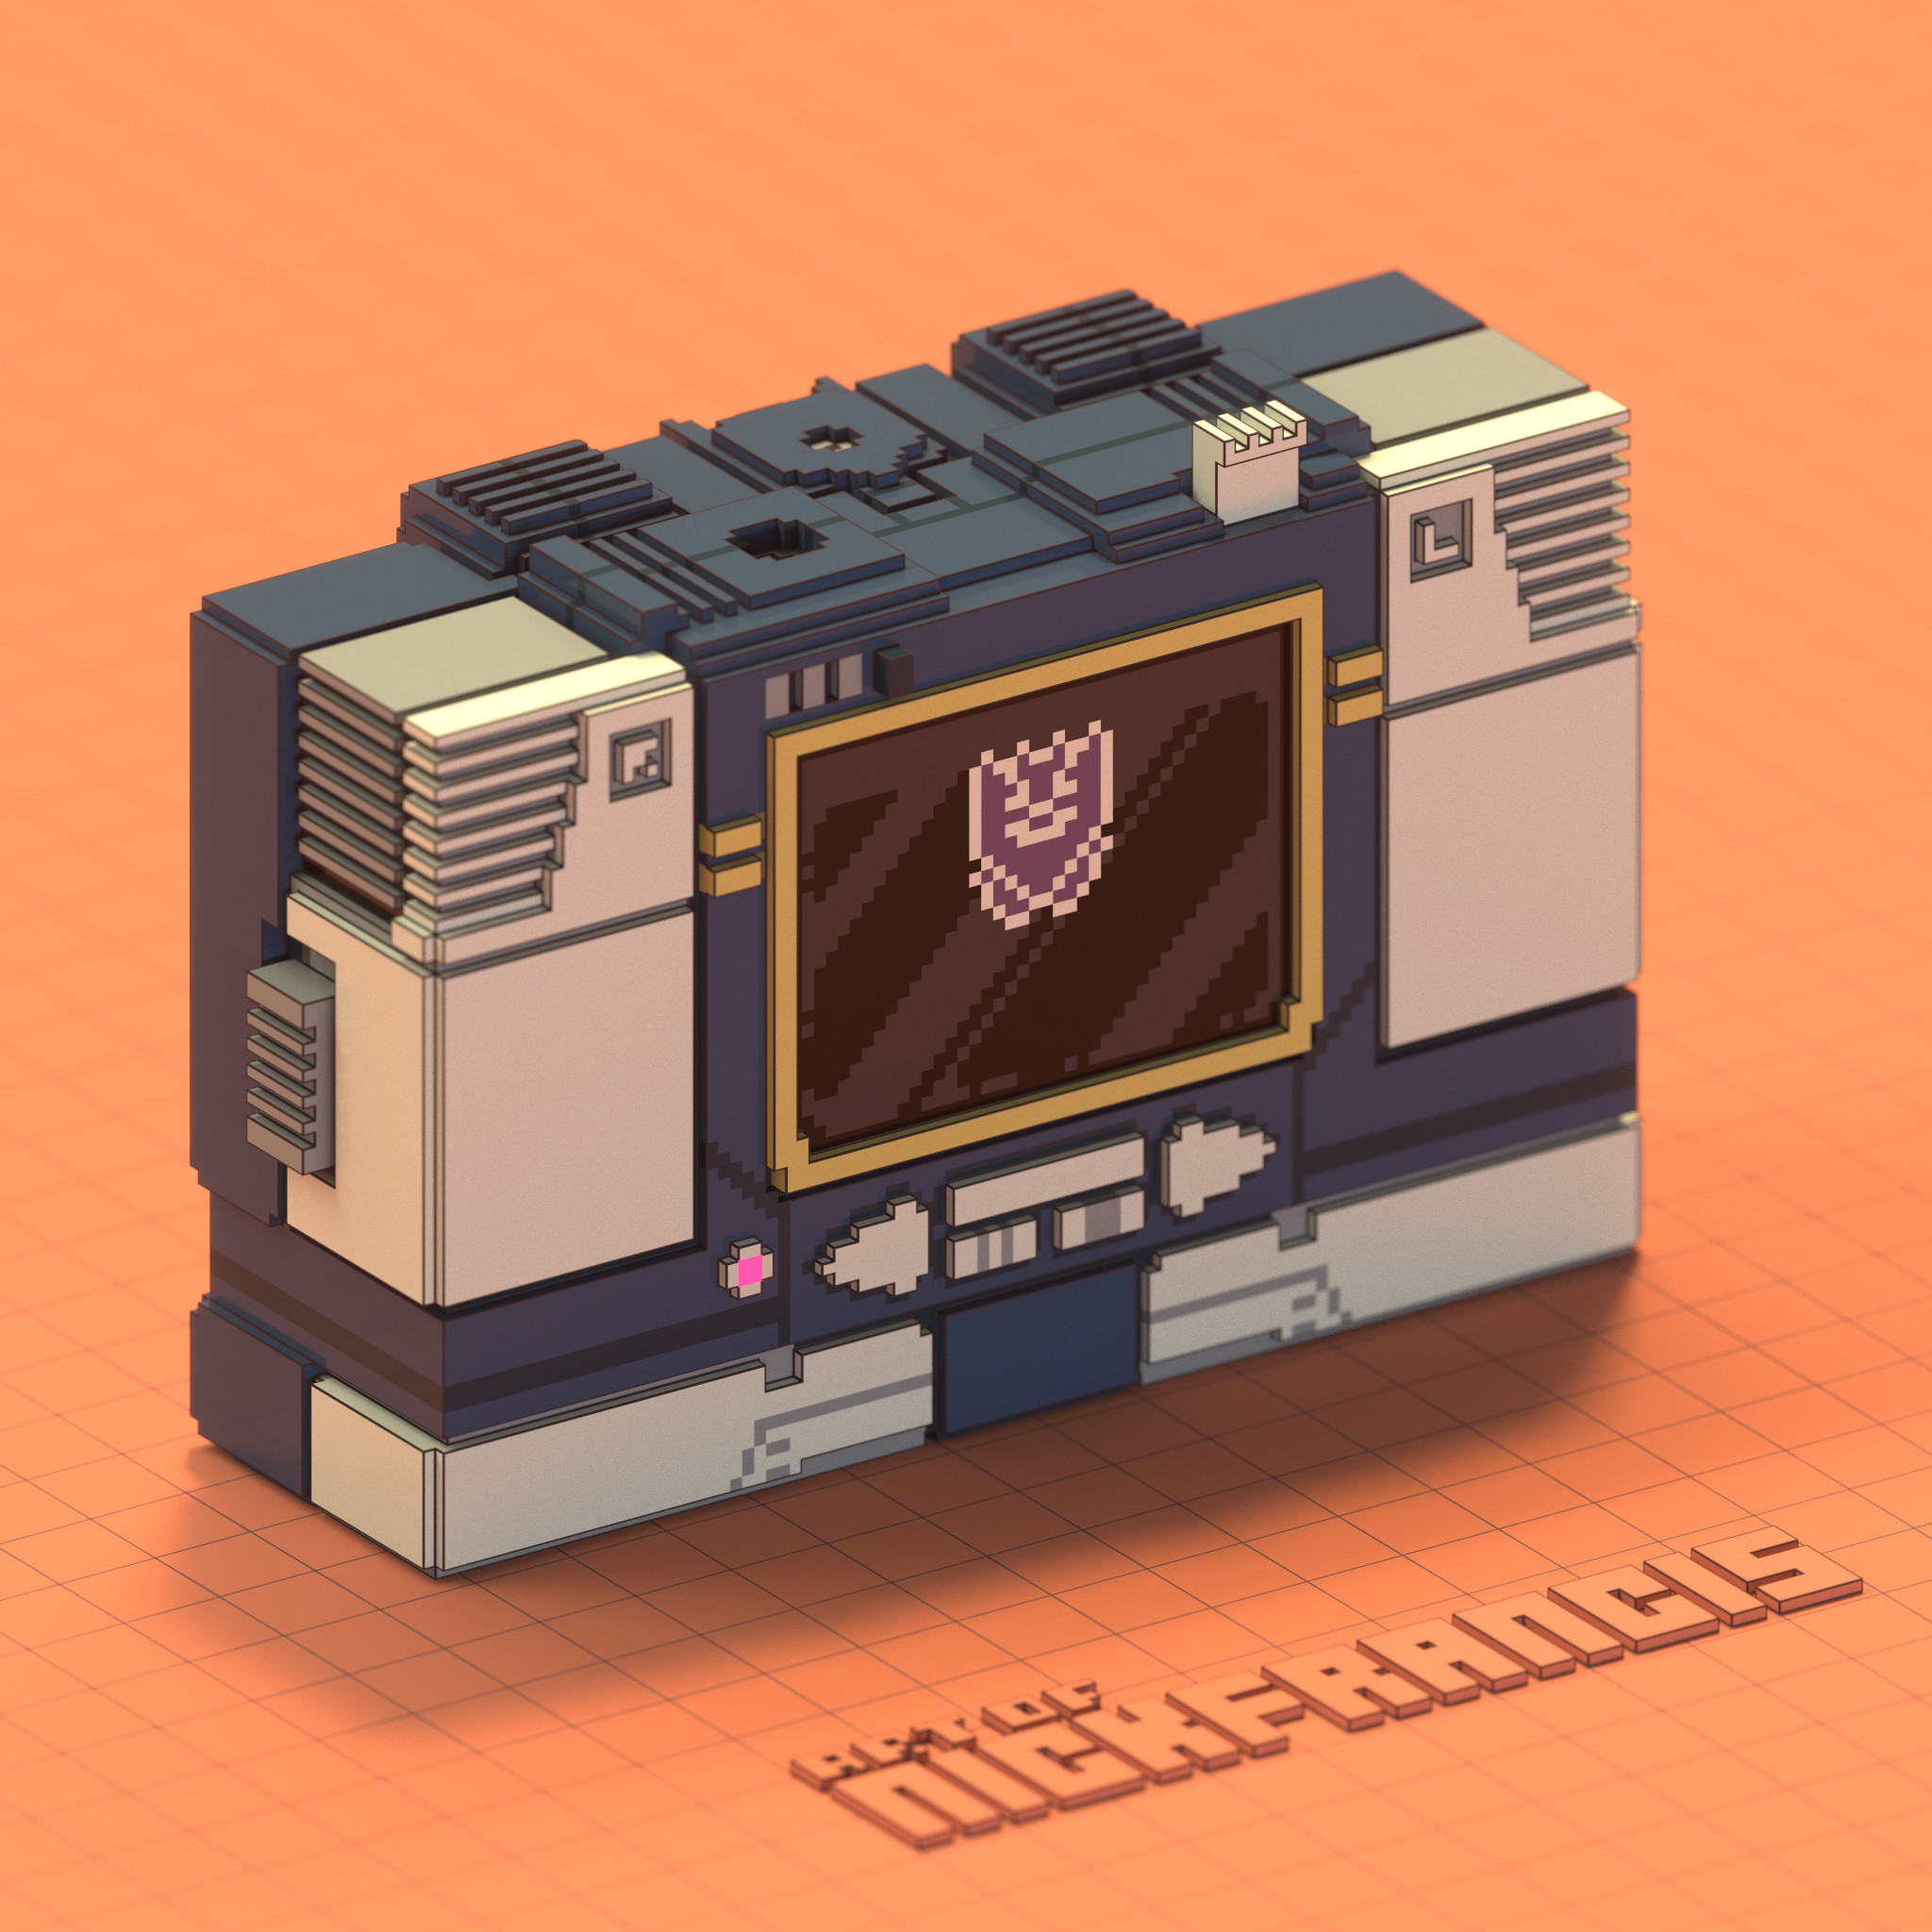 Front-facing rendering of Soundwave in his classic "G1" disguise as 80s styled portable cassette player.